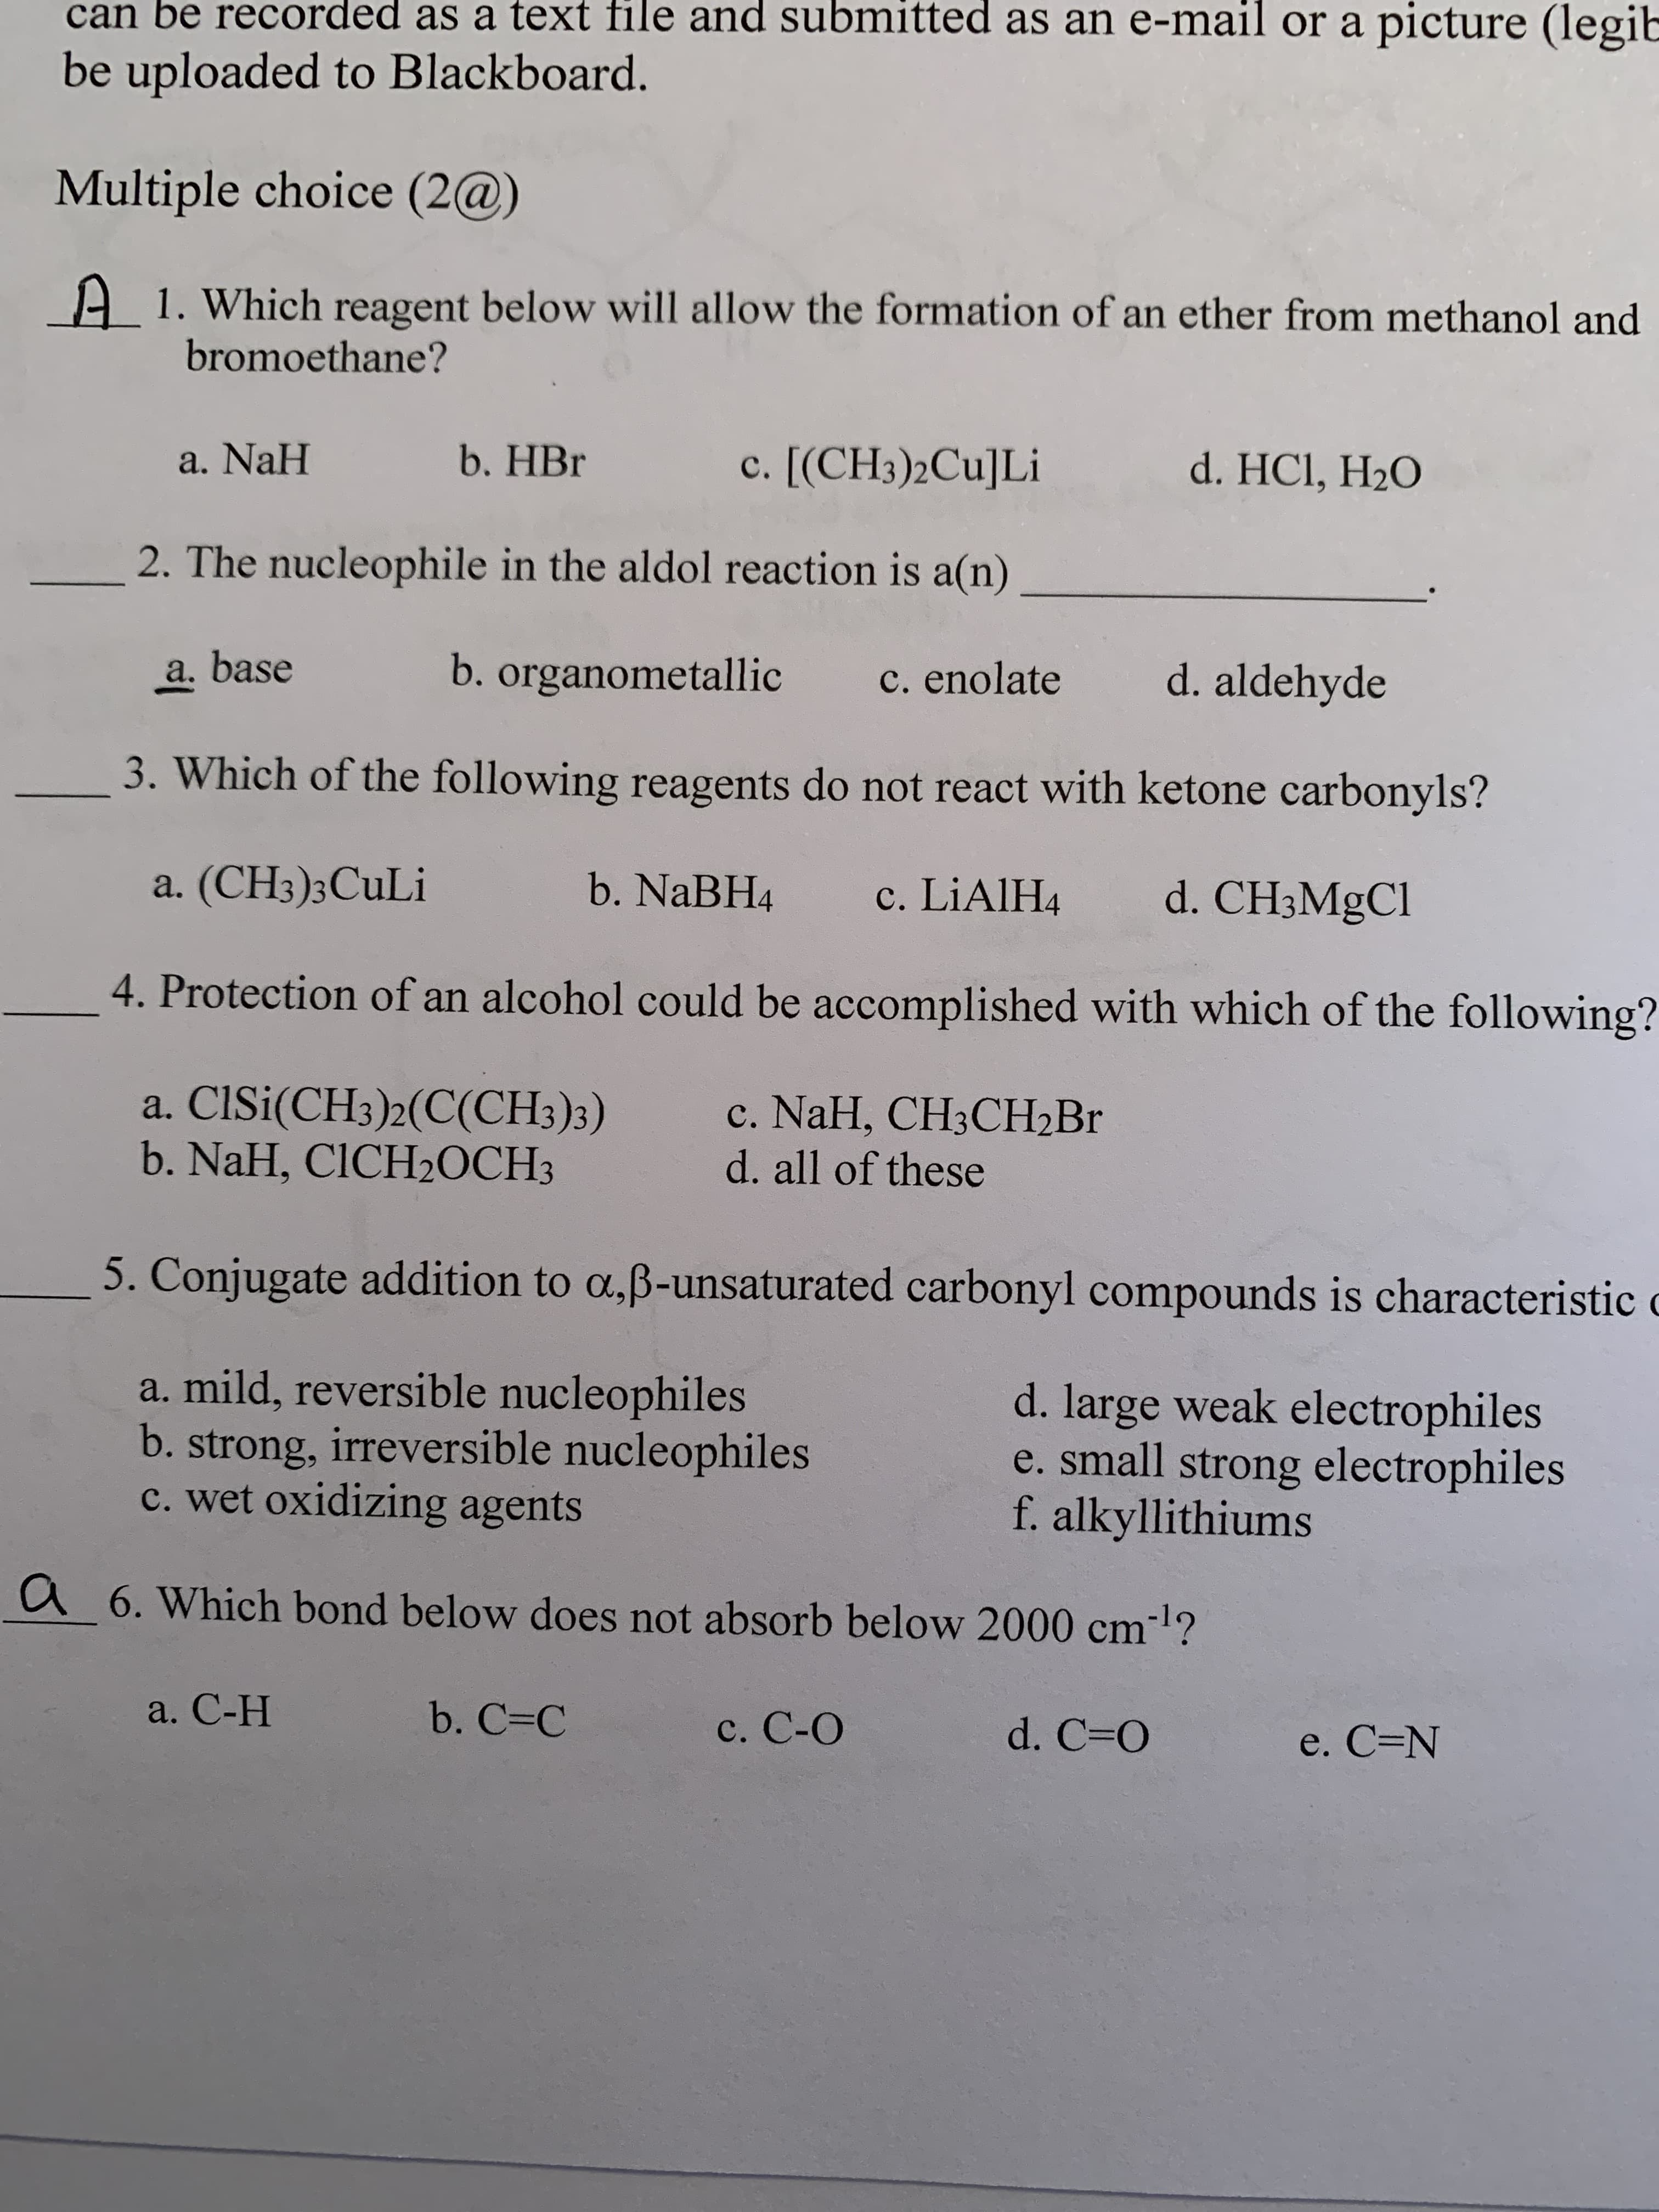 can be recorded as a text file and submitted as an e-mail or a picture (legib
be uploaded to Blackboard.
Multiple choice (2@)
A 1. Which reagent below will allow the formation of an ether from methanol and
bromoethane?
a. NaH
b. HBr
c. [(CH3)2Cu]Li
d. HCl, H2O
2. The nucleophile in the aldol reaction is a(n)
a. base
b. organometallic
C. enolate
d. aldehyde
3. Which of the following reagents do not react with ketone carbonyls?
a. (CH3);CuLi
b. NaBH4
c. LIAIH4
d. CH3MGC1
4. Protection of an alcohol could be accomplished with which of the following?
a. ClSi(CH3)2(C(CH3)3)
b. NaH, CICH2OCH3
c. NaH, CH3CH2B.
d. all of these
5. Conjugate addition to a,ß-unsaturated carbonyl compounds is characteristic
a. mild, reversible nucleophiles
b. strong, irreversible nucleophiles
c. wet oxidizing agents
d. large weak electrophiles
e. small strong electrophiles
f. alkyllithiums
a 6. Which bond below does not absorb below 2000 cm-l?
a. С-Н
b. C=C
c. C-O
d. C=O
e. C=N
